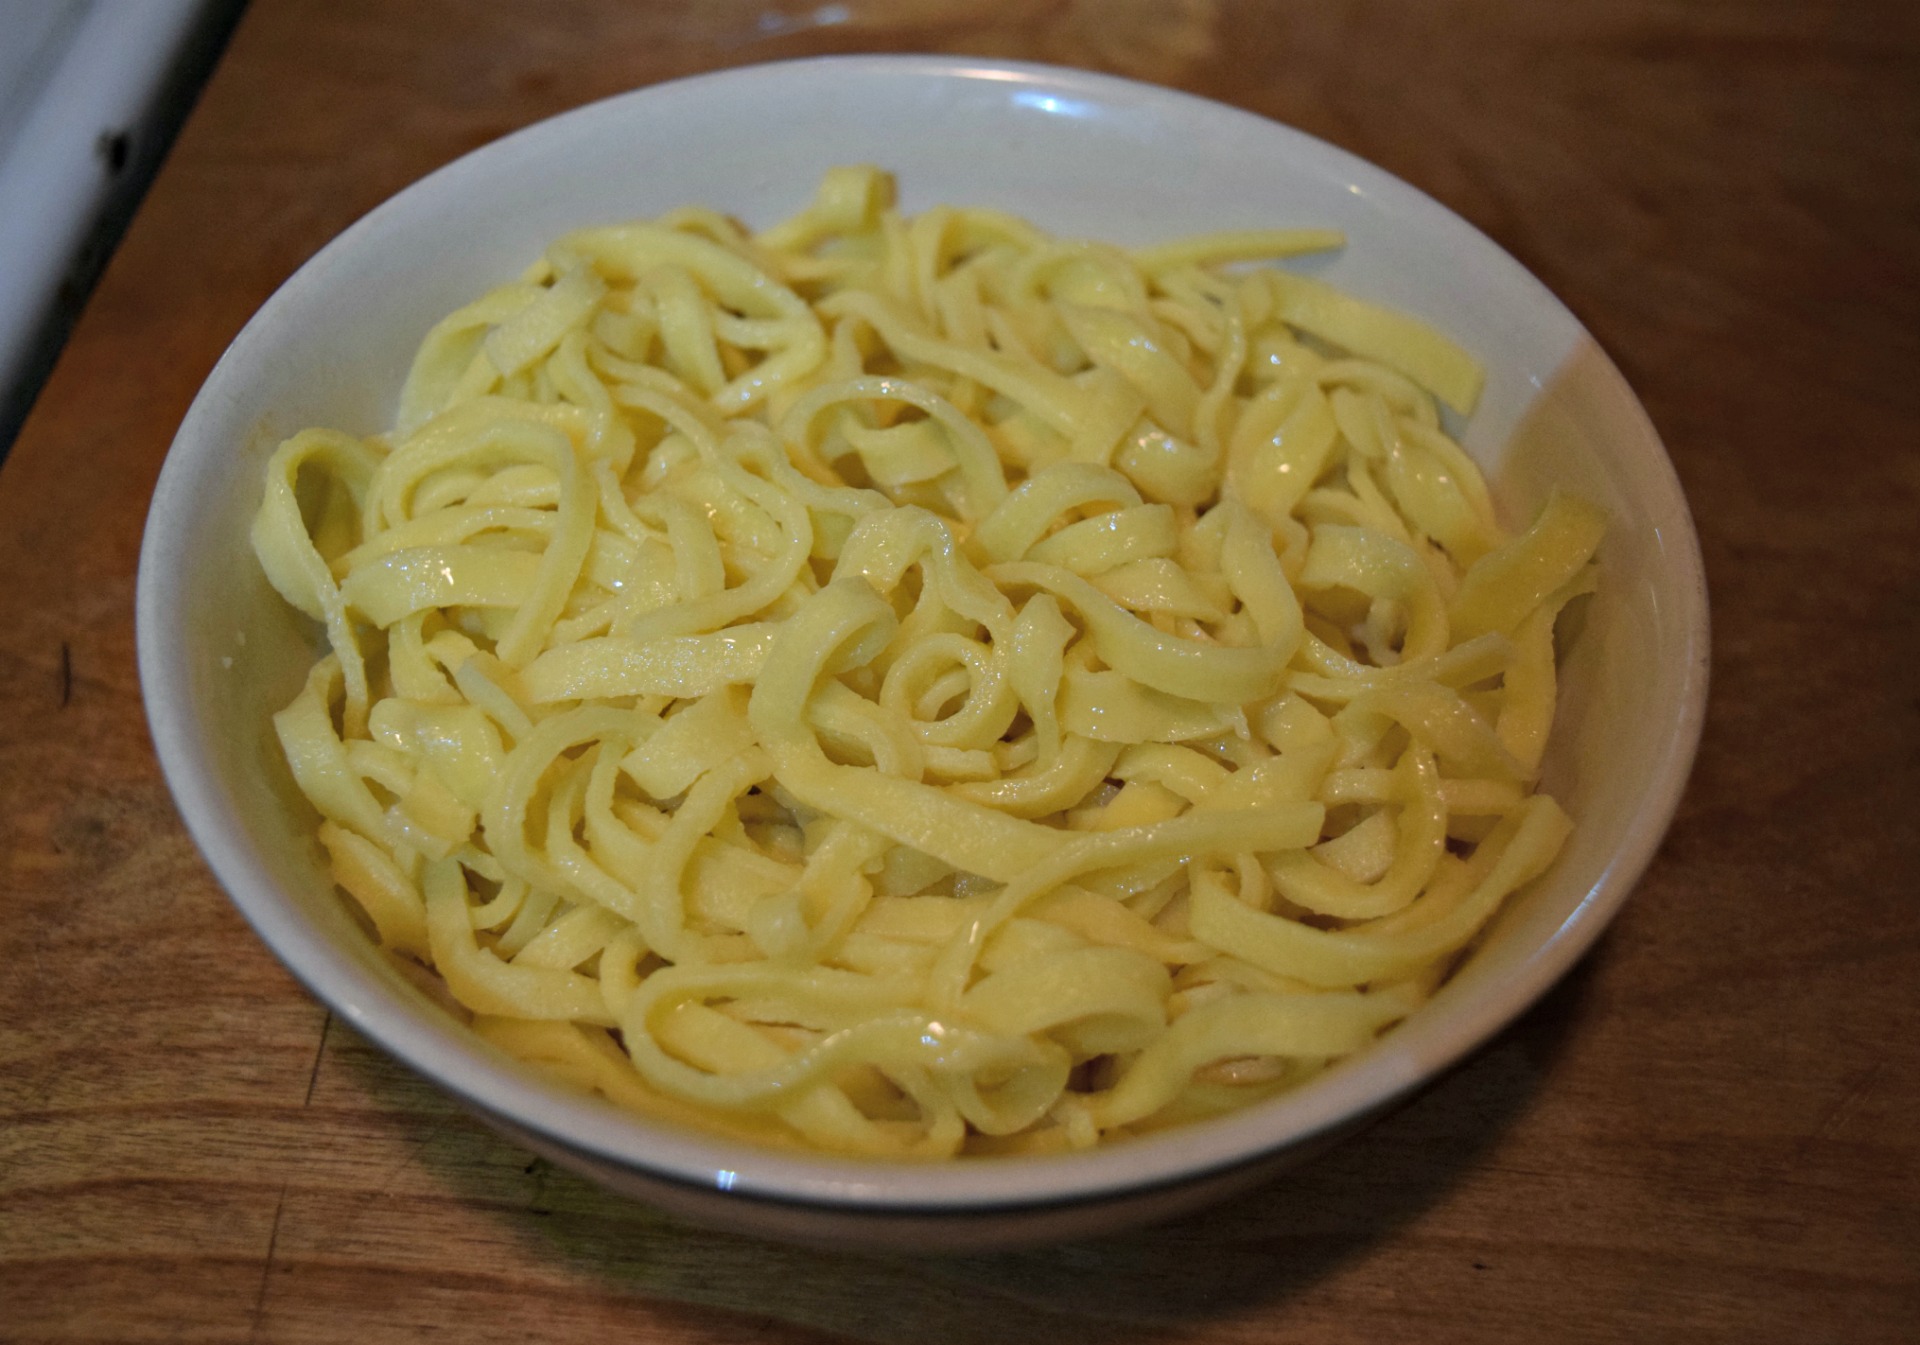 Egg noodles from Pasta Gina